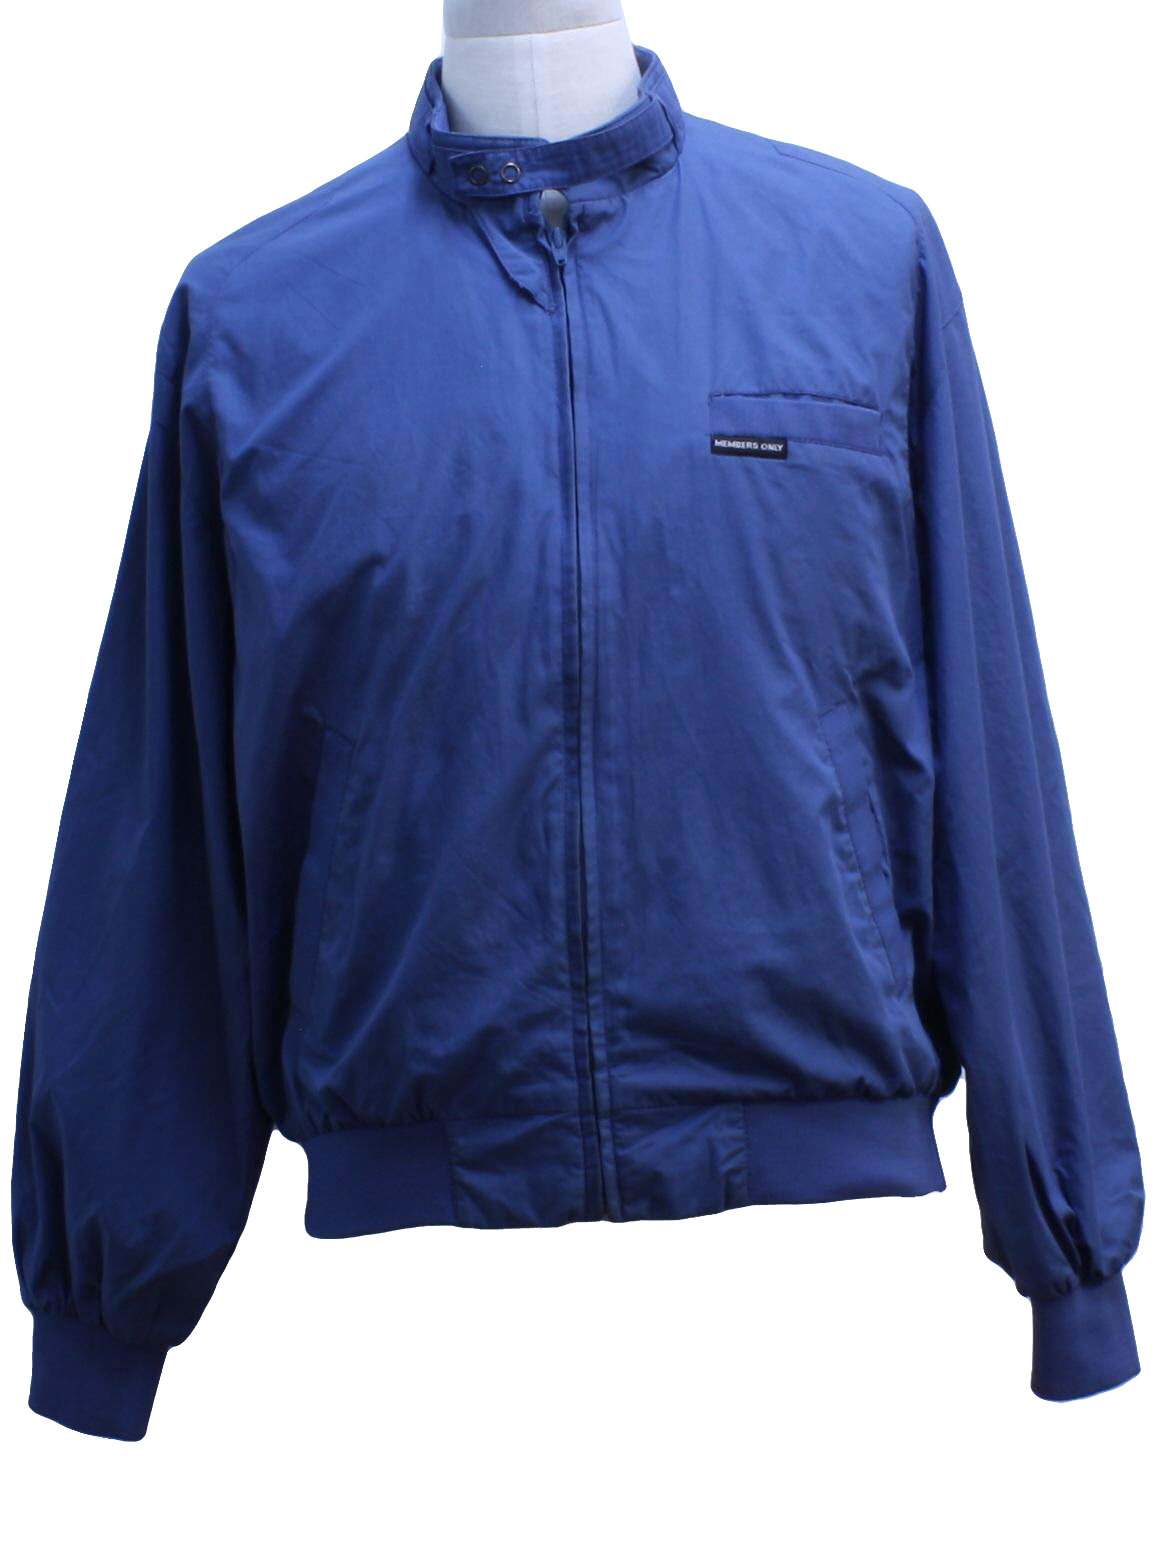 Retro 1980s Jacket: 80s style -Members Only- Mens blue cotton polyester ...